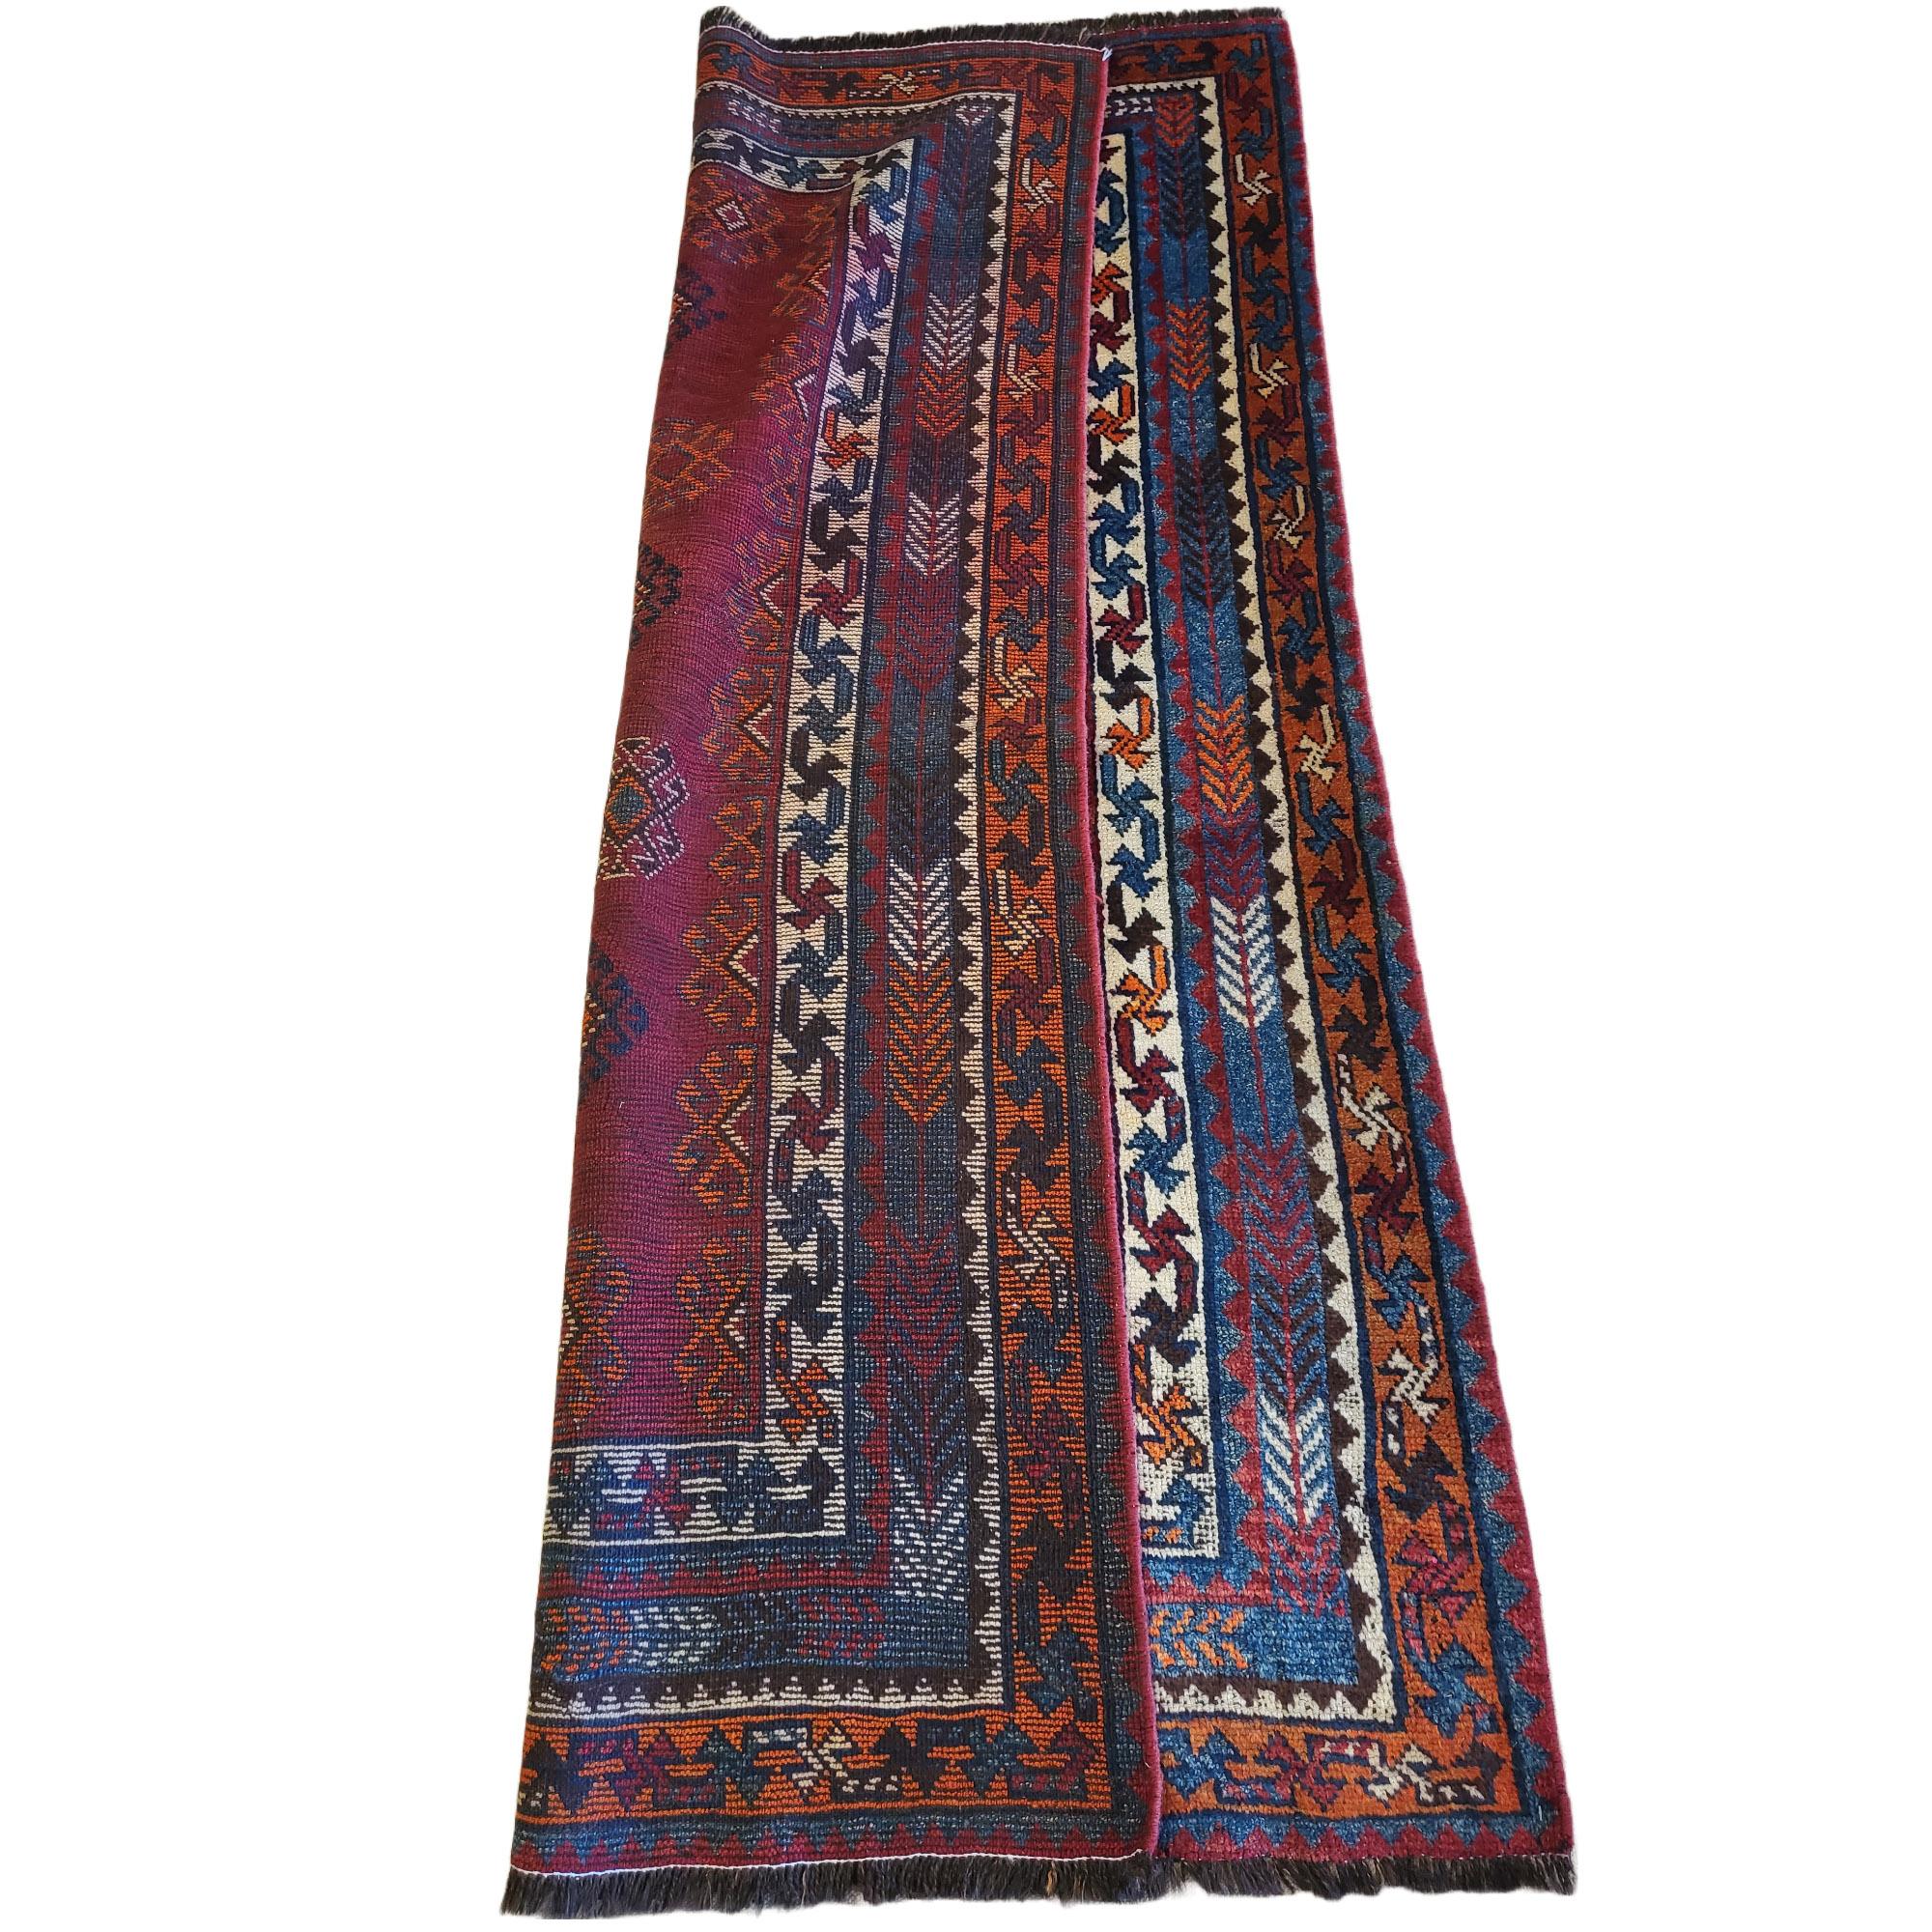 Beautiful 6'9x4'6 antique Persian Lori.

Made from Persian wool raised, sheared, dyed, spun and woven by the famous Lori tribe. Produced all while hiking with their flock up and down the country side.

Utilizing ancient weaving techniques that